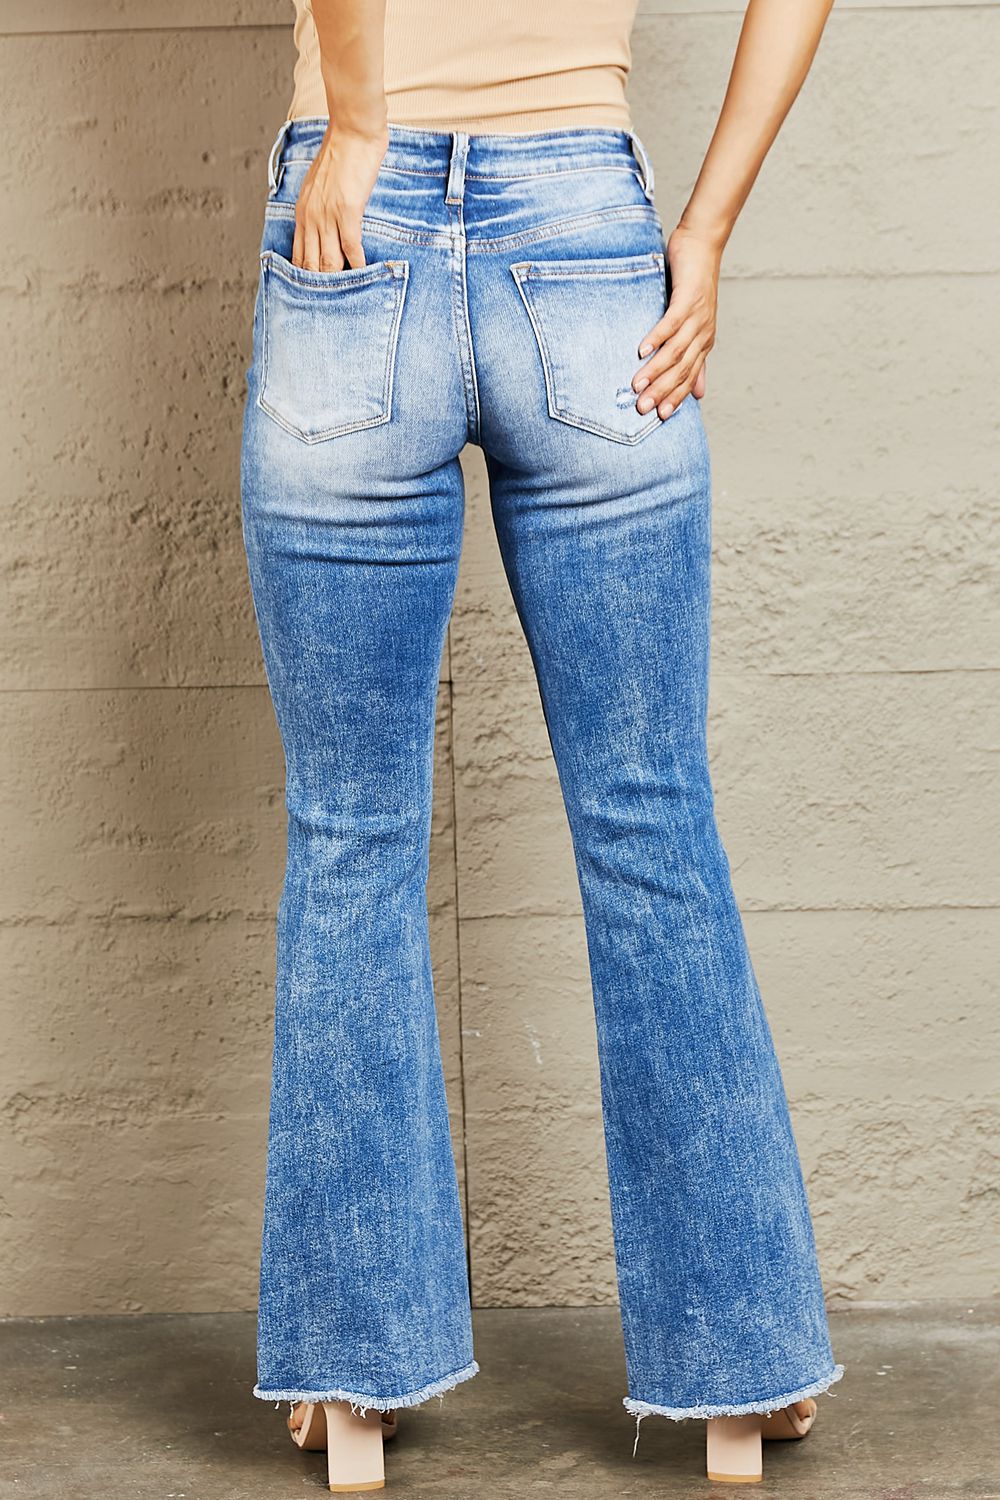 BAYEAS Izzie Mid Rise Bootcut Jeans - ONLINE EXCLUSIVE